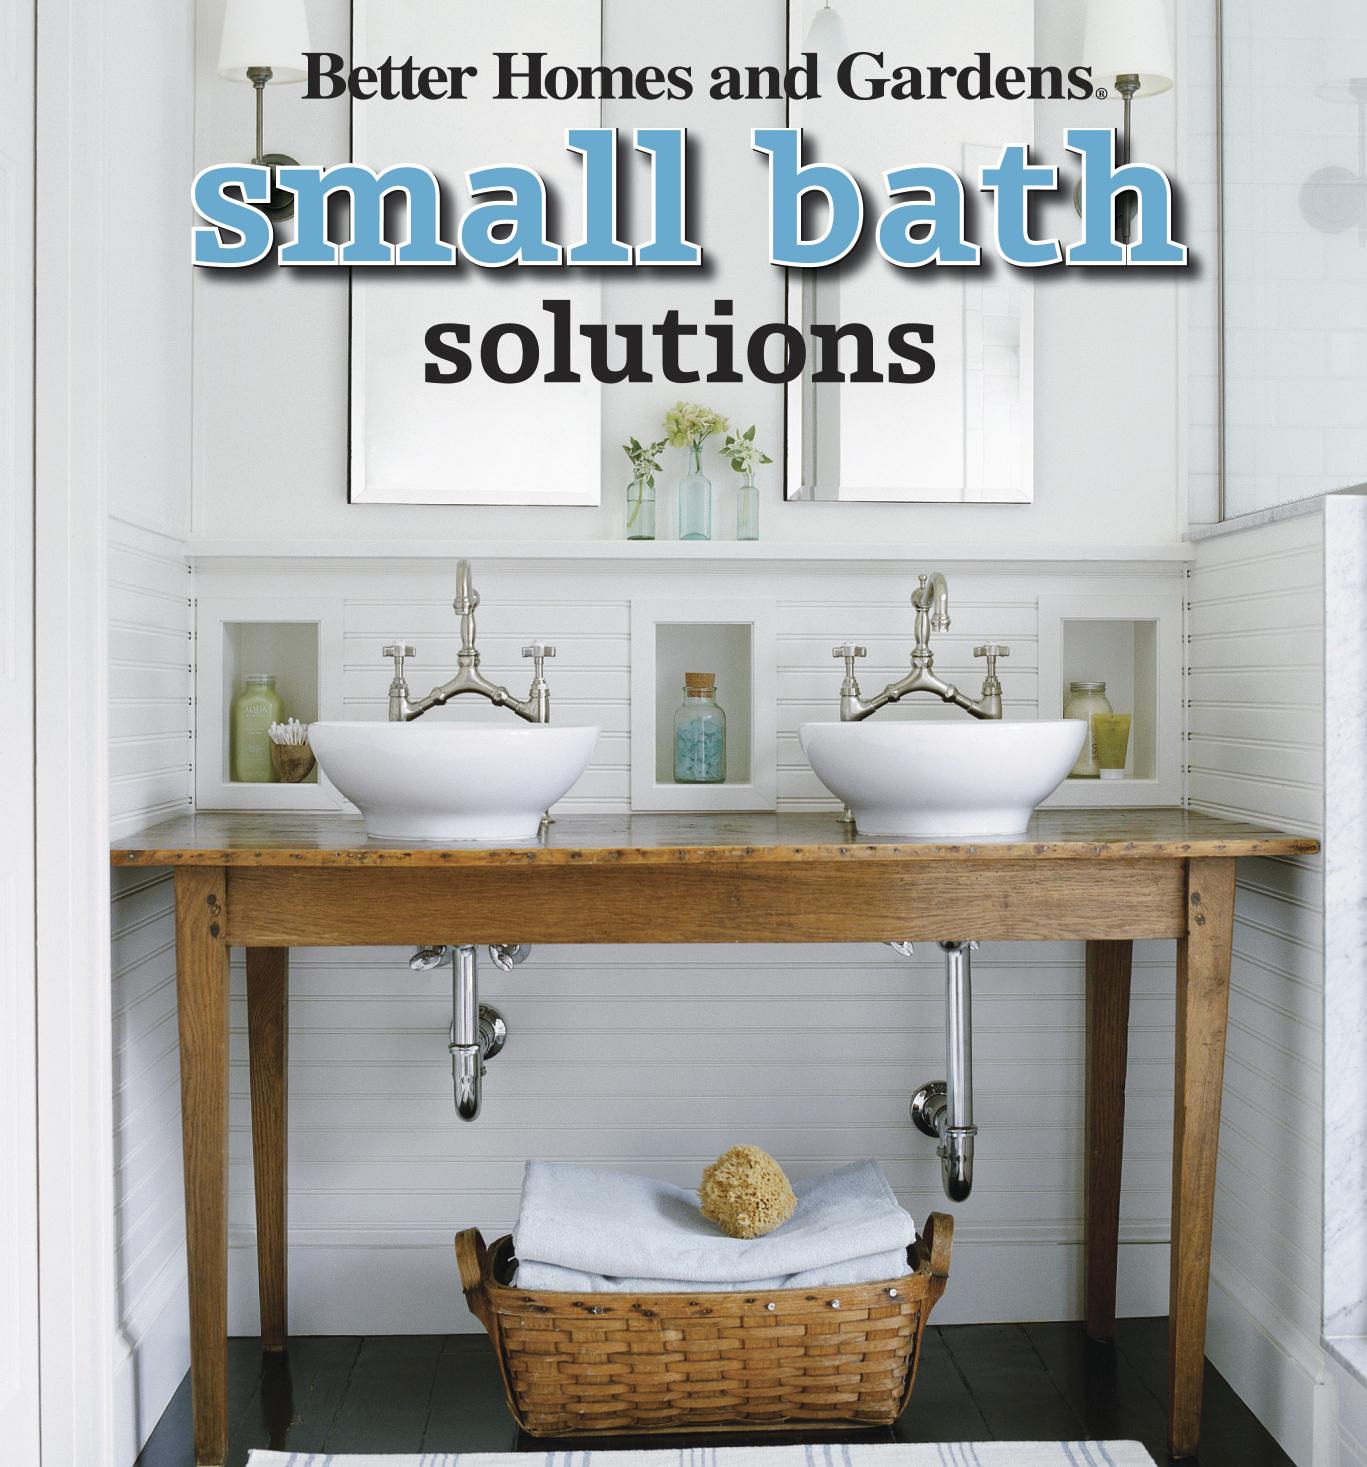 Small Bath Solutions by Better Homes and Gardens